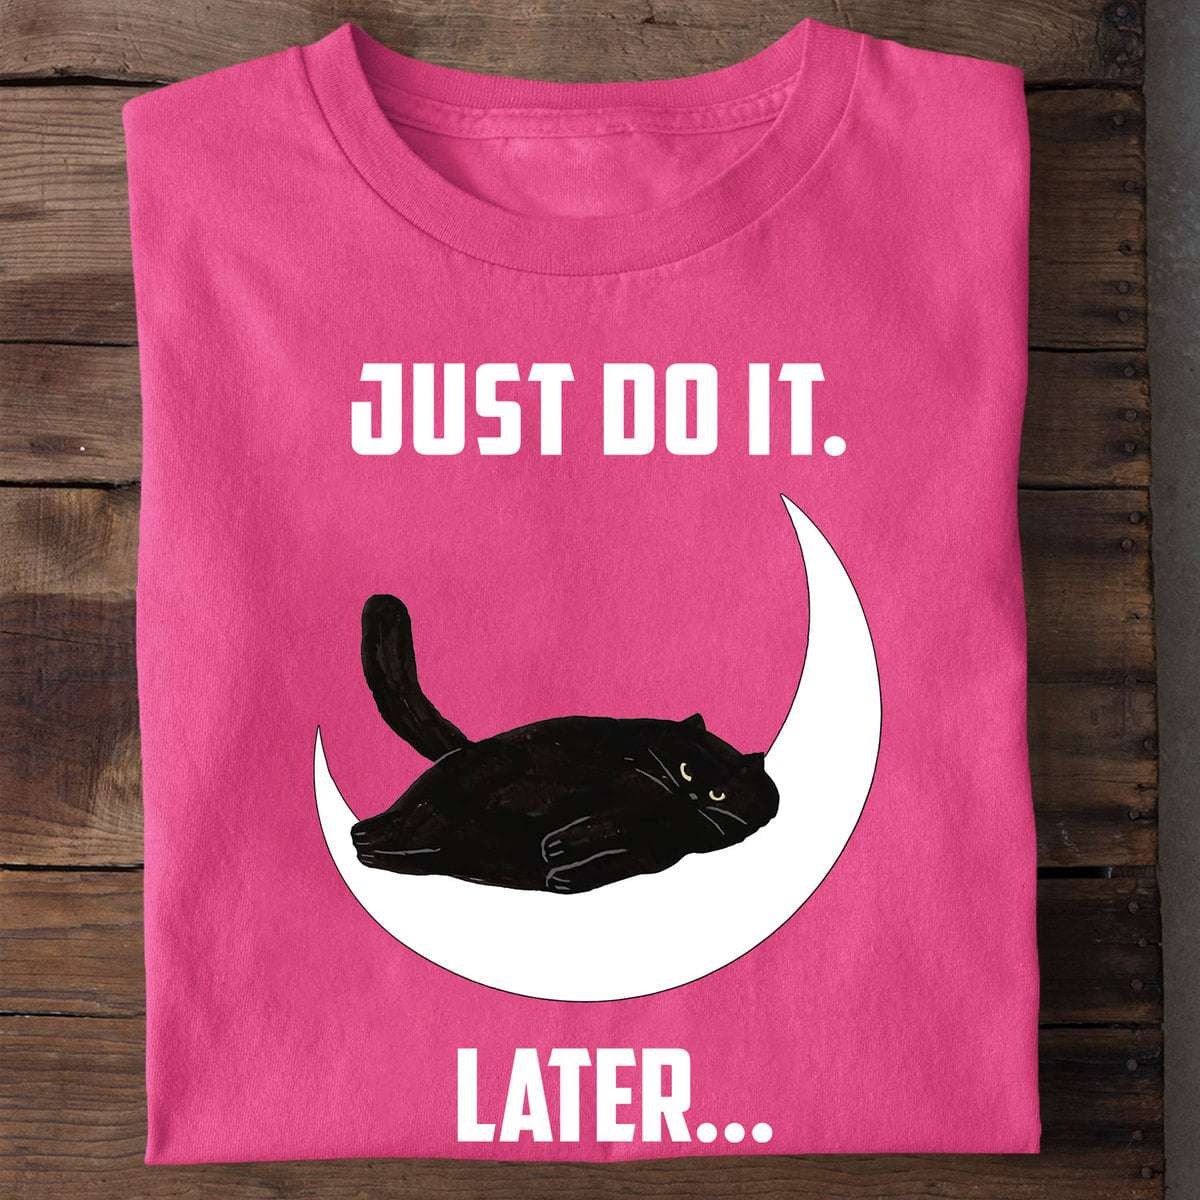 Black Cat Moon - Just do it later